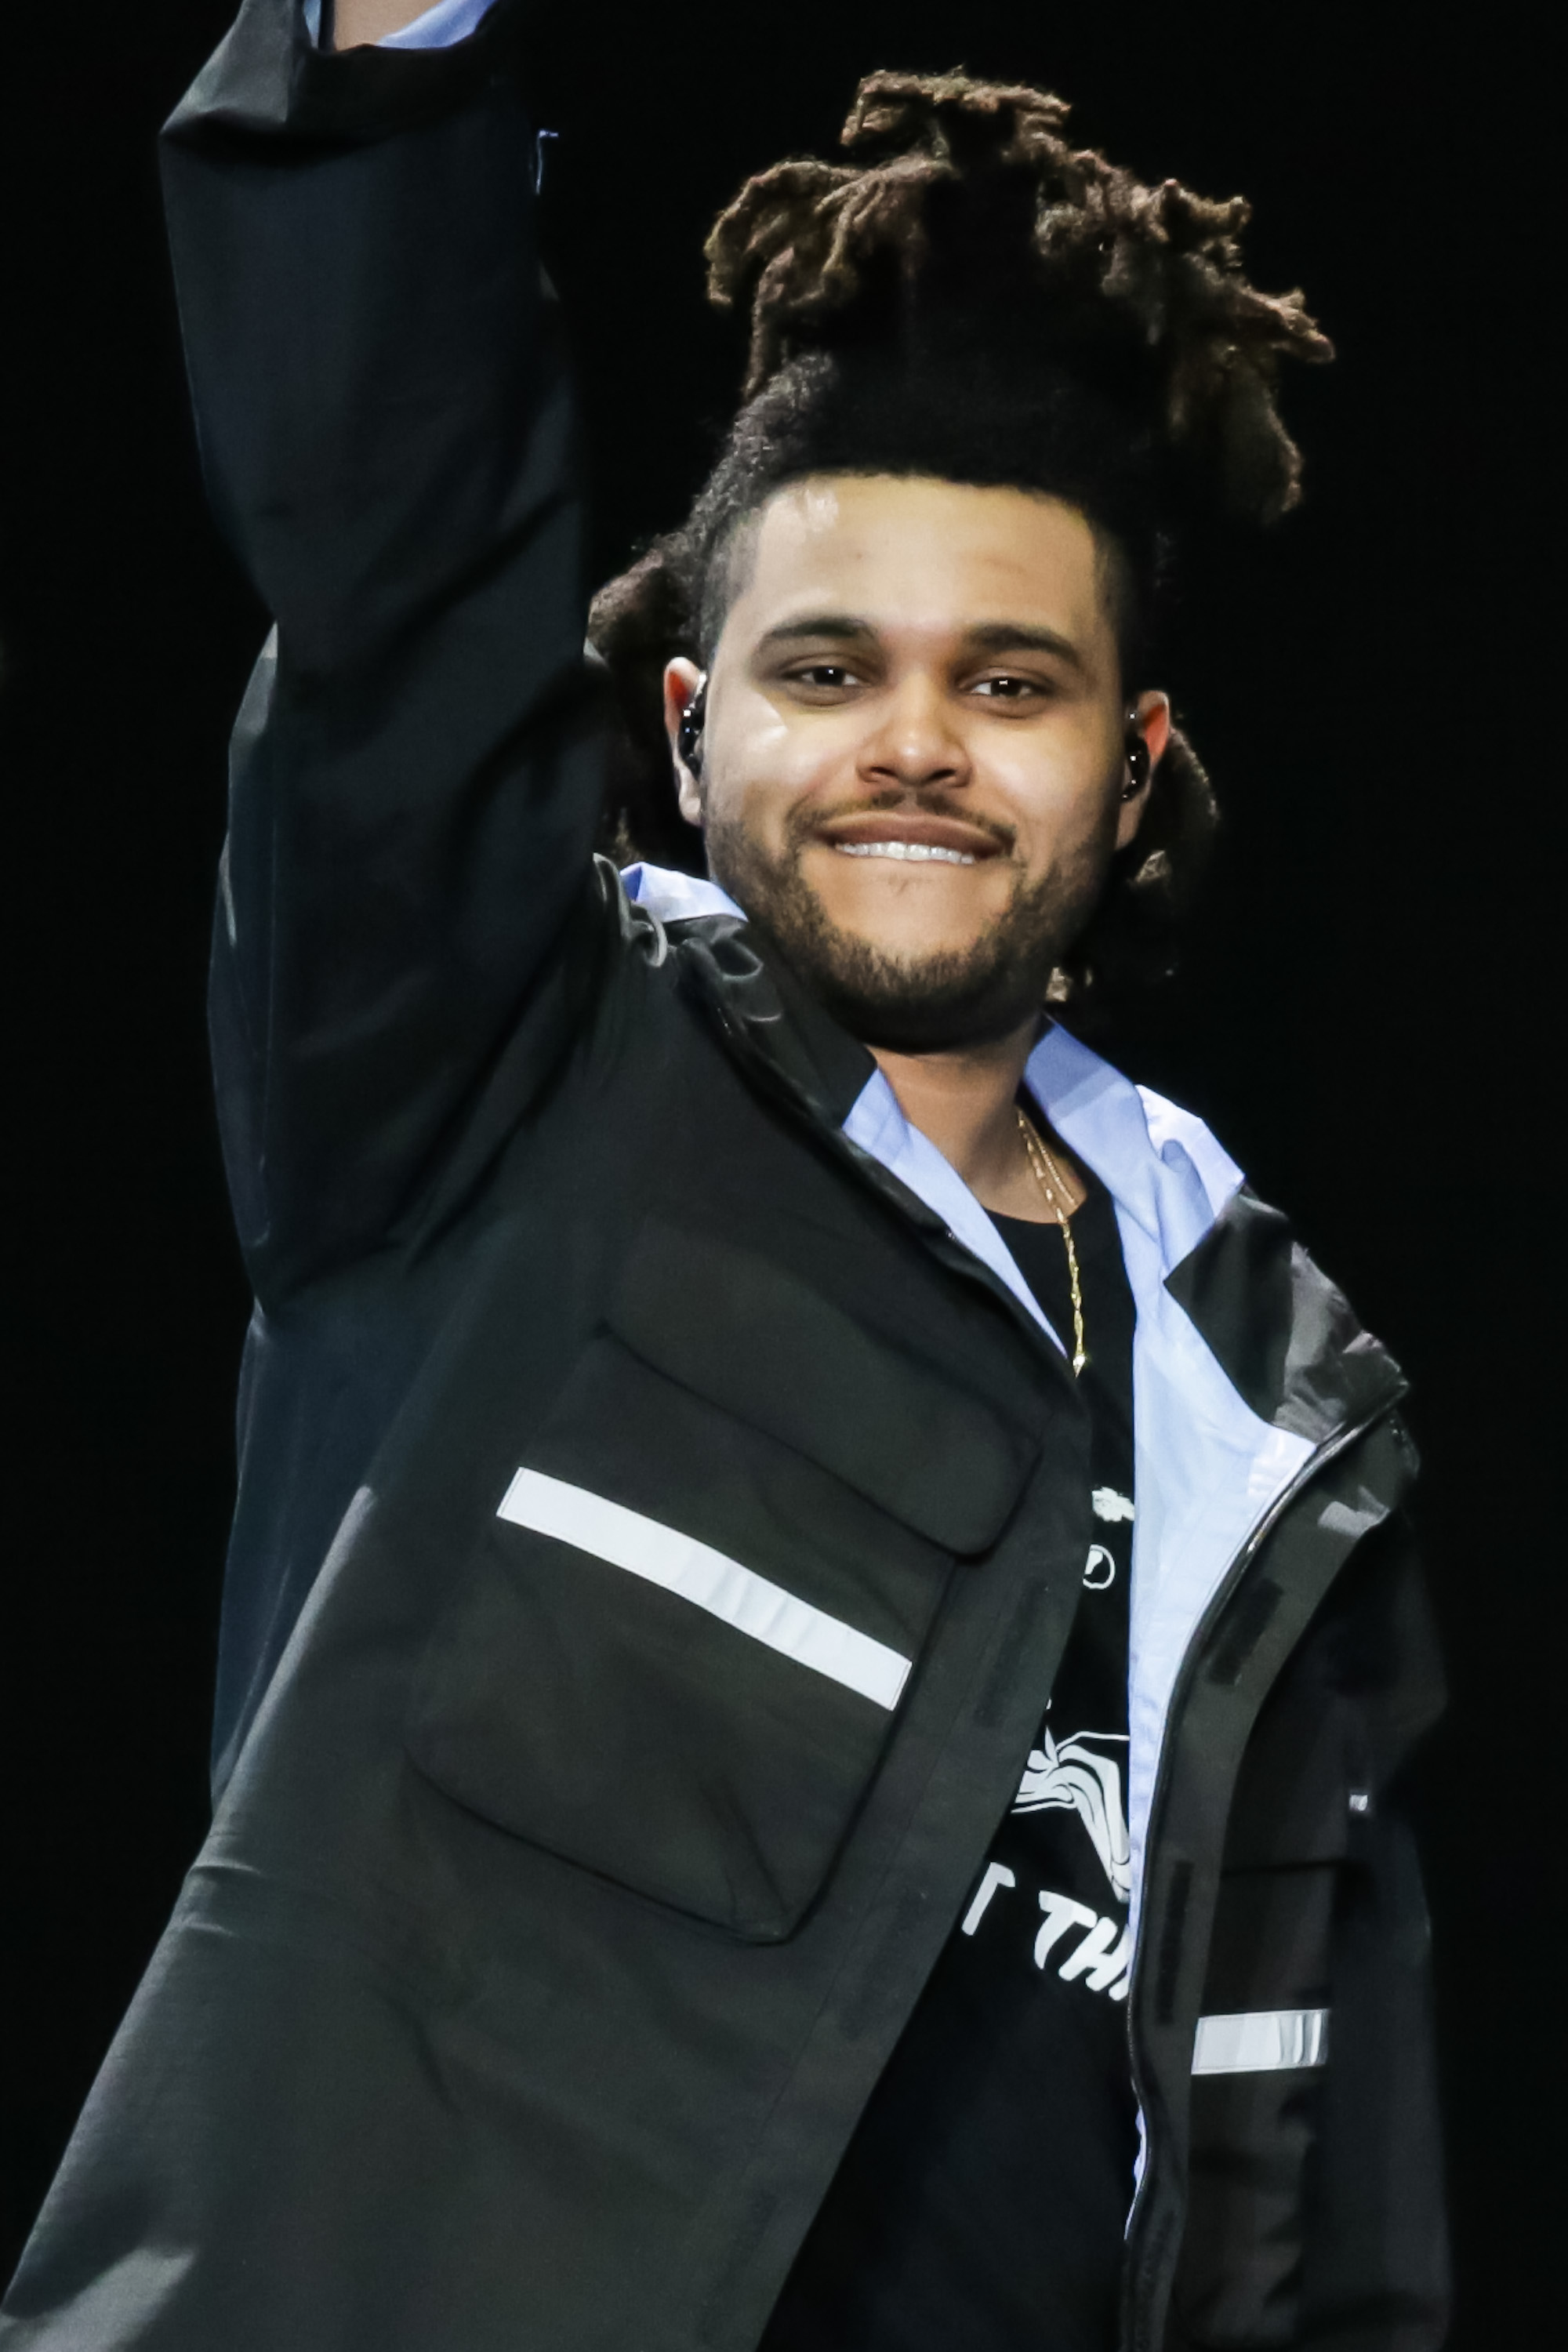 <p>In 2015, pop-R&B singer The Weeknd became the first artist in history to claim the top three spots on Billboard's Hot R&B Songs chart with "Earned It" at No. 3, "The Hills" at No. 2 and "Can't Feel My Face" at No. 1. Talk about a Starboy!</p>